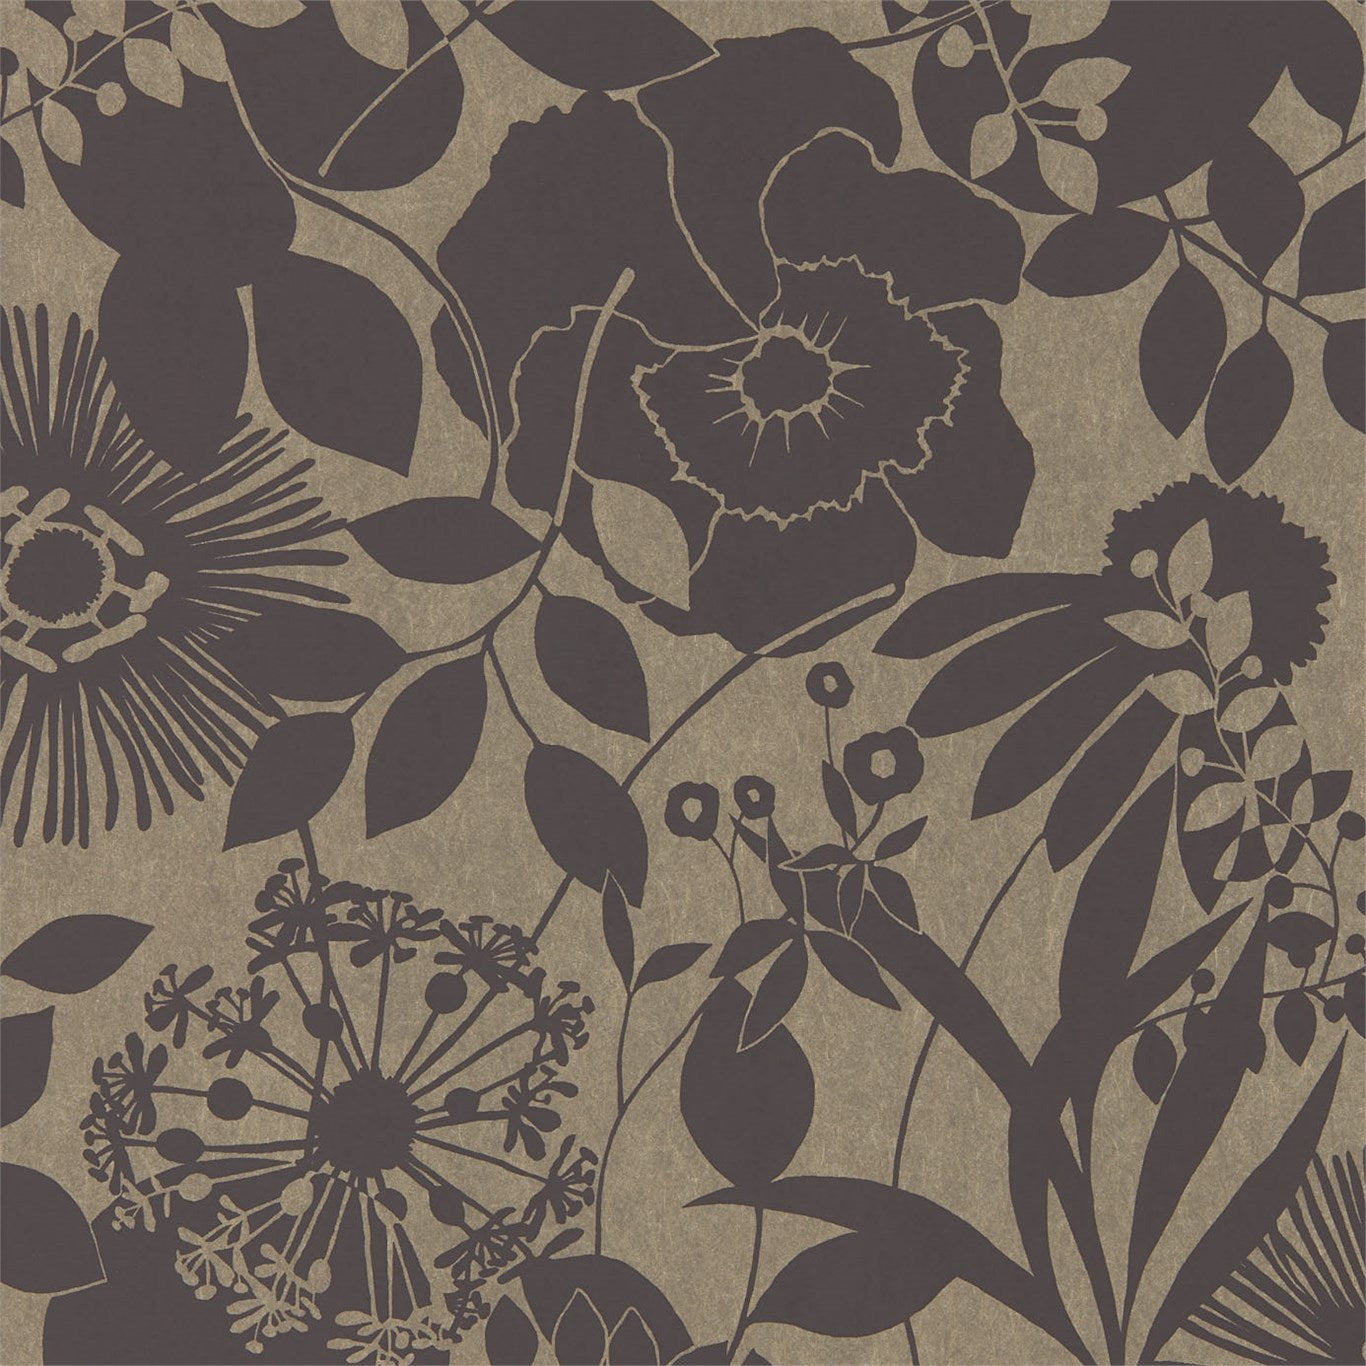 Harlequin on Twitter Coquette features overblown flowers silhouetted  flower stems and leaves combined to create a beautiful wallpaper in a  monocolour option httpstcosdFp4rrJ8p  Twitter